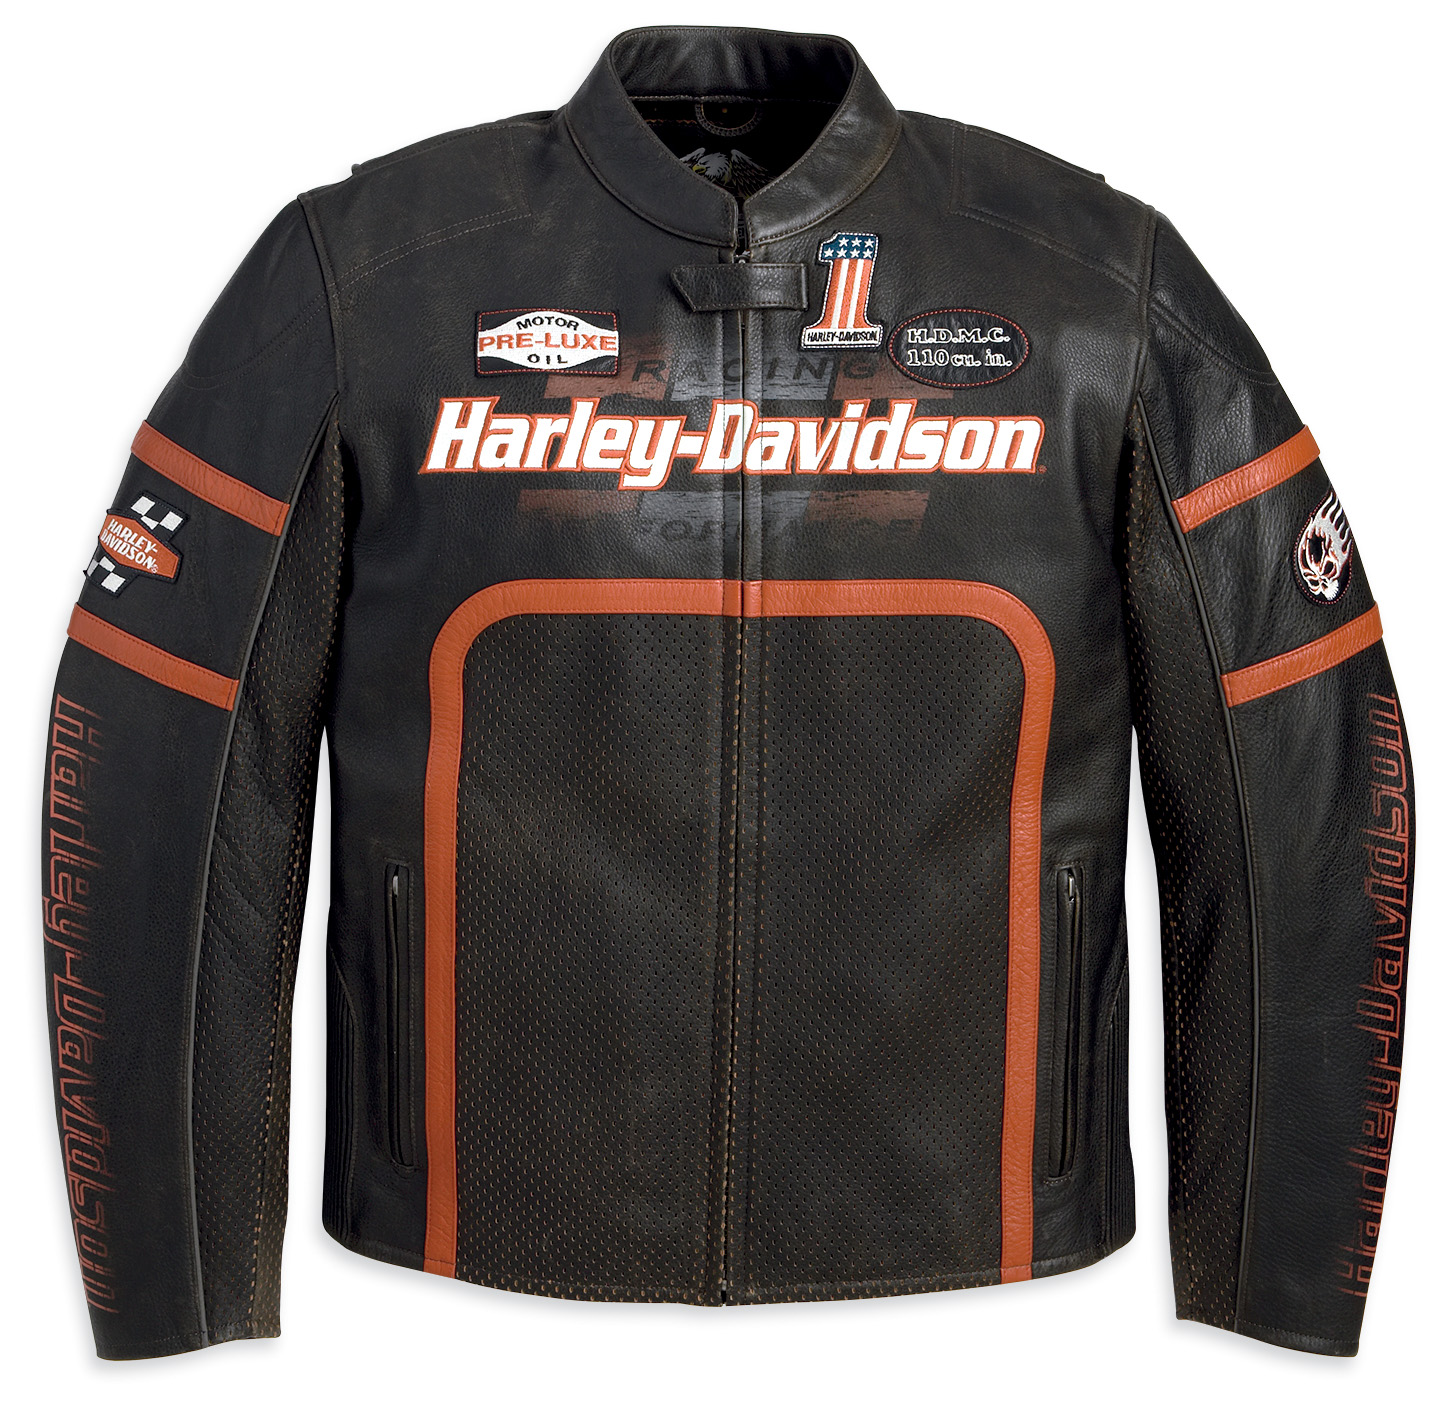 HD Gear the best value, or just to impress? - Harley Davidson Forums